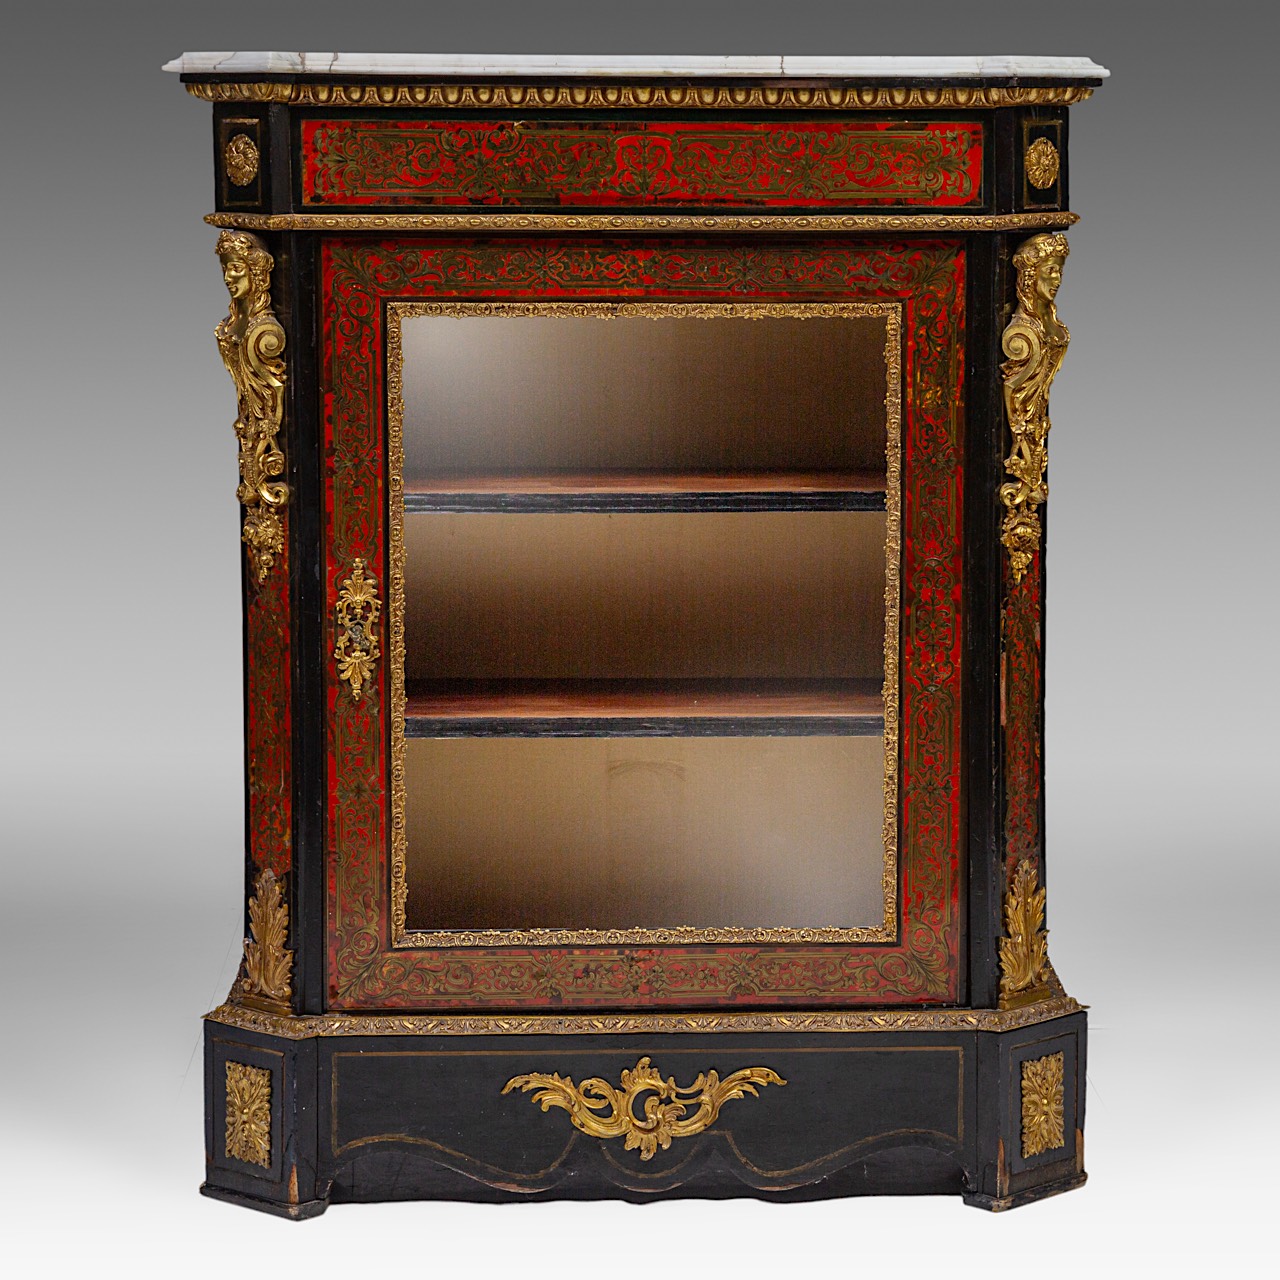 A Napoleon III (1852-1870) Boulle work display cabinet with gilt bronze mounts and marble top, H 112 - Image 2 of 6